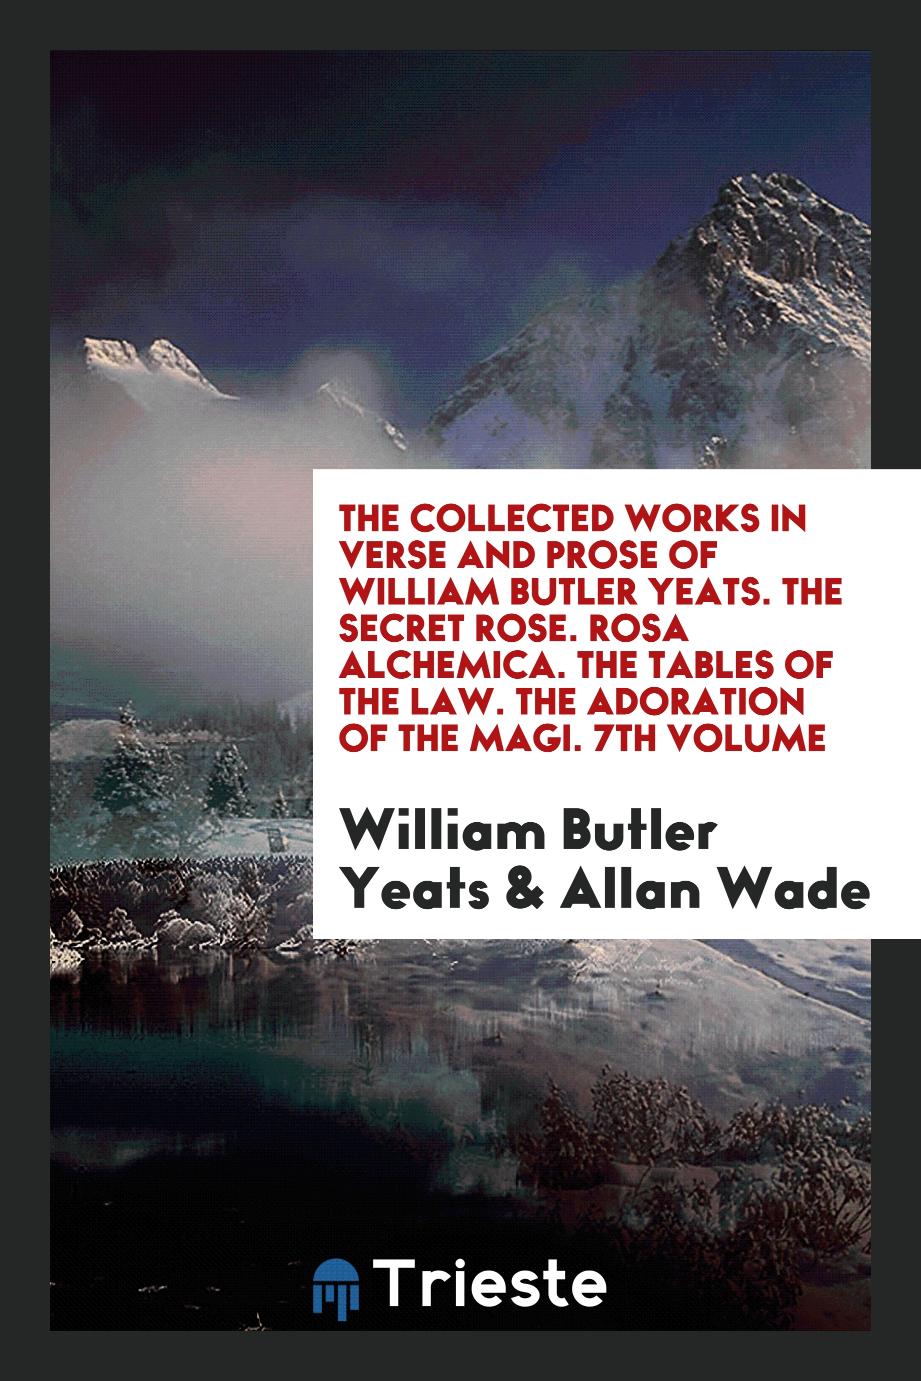 The Collected Works in Verse and Prose of William Butler Yeats. The Secret Rose. Rosa Alchemica. The Tables of the Law. The Adoration of the Magi. 7th Volume